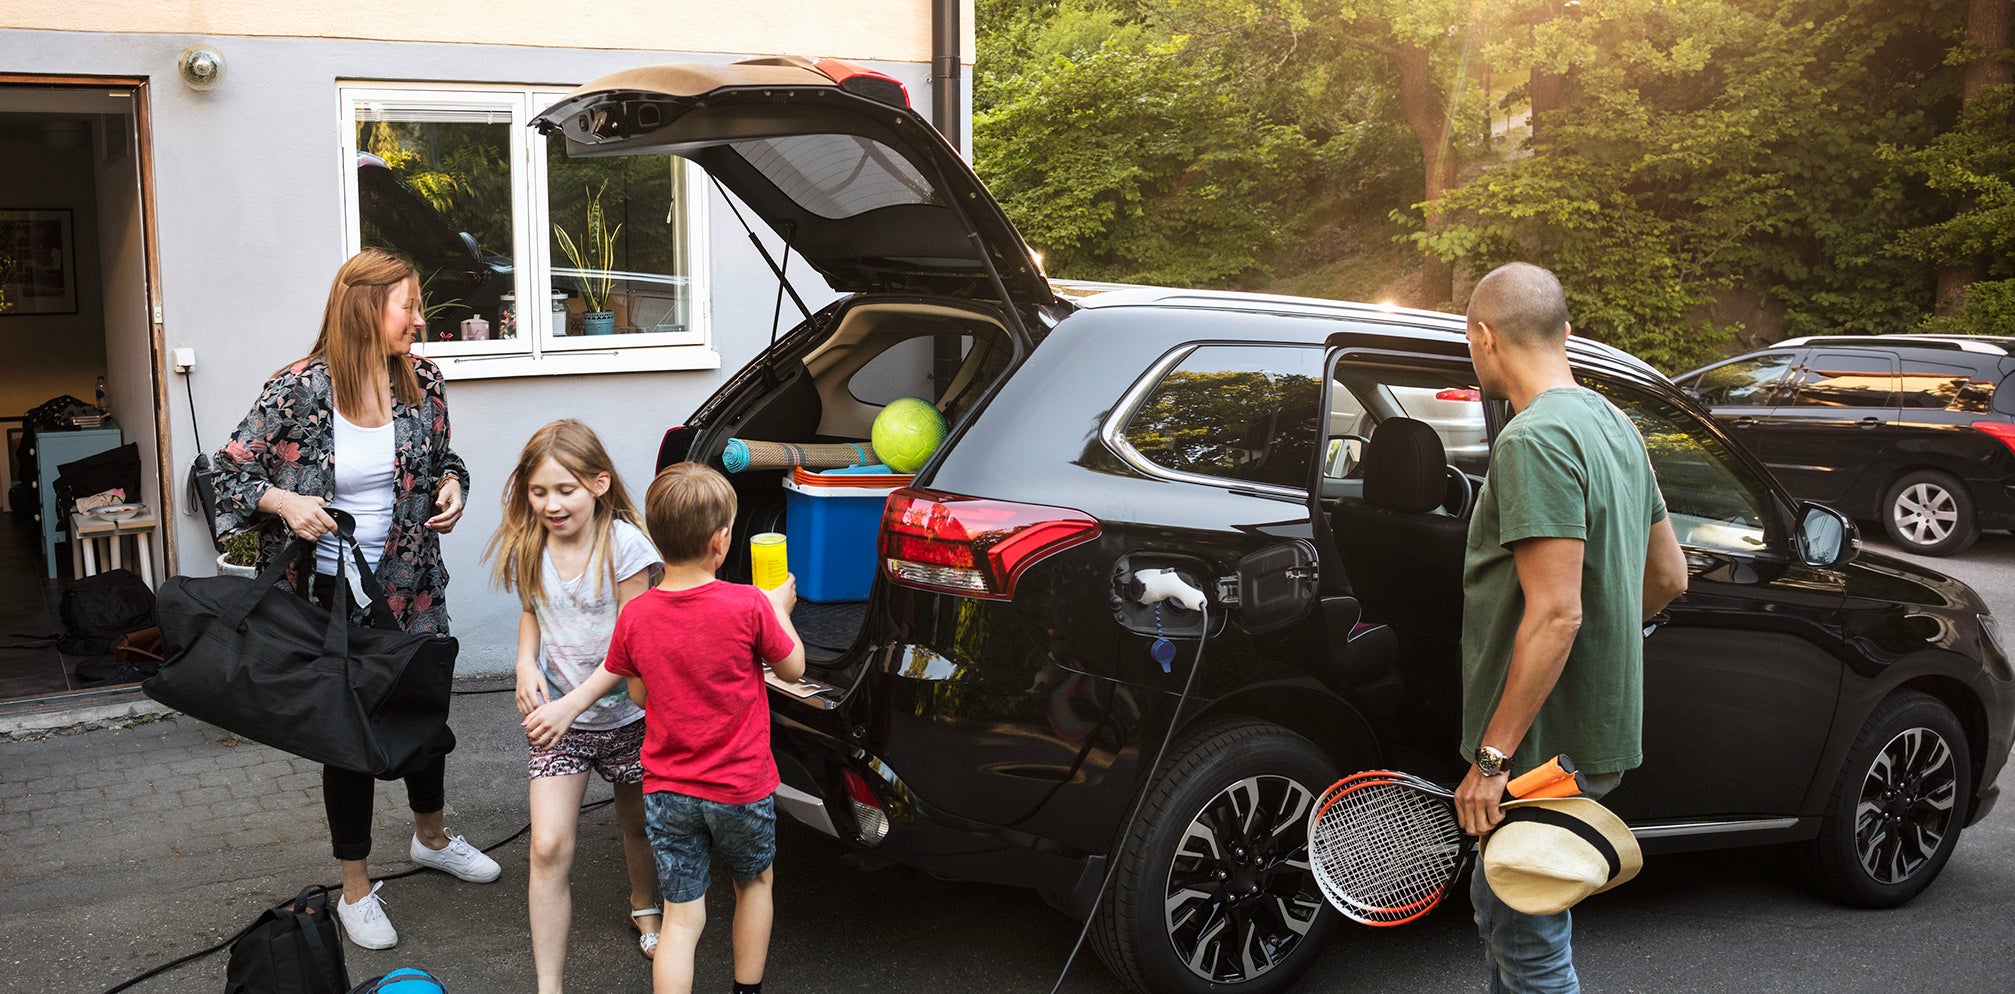 A family is loading their car, ready for holidays.